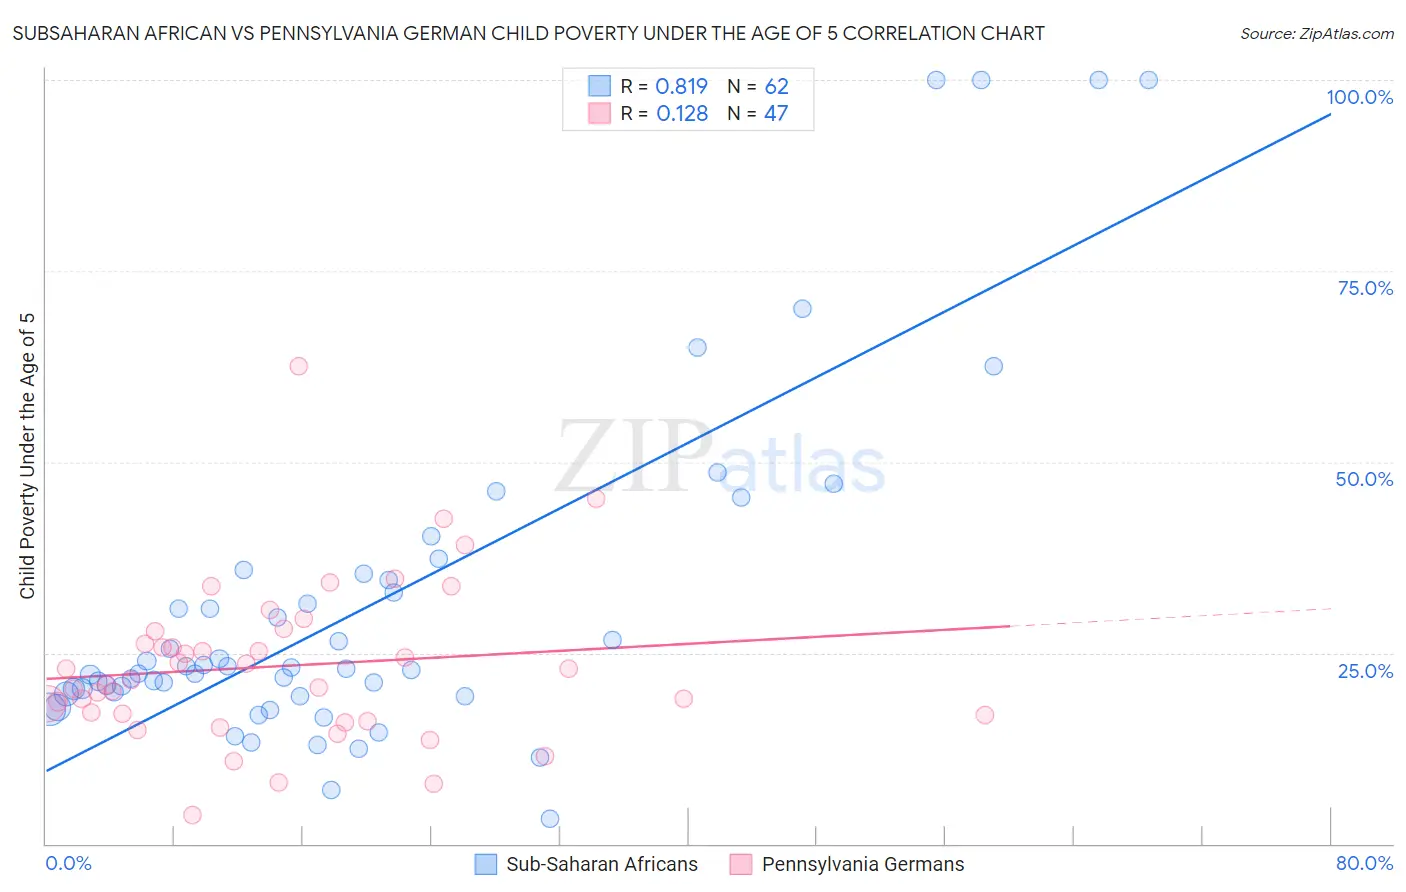 Subsaharan African vs Pennsylvania German Child Poverty Under the Age of 5